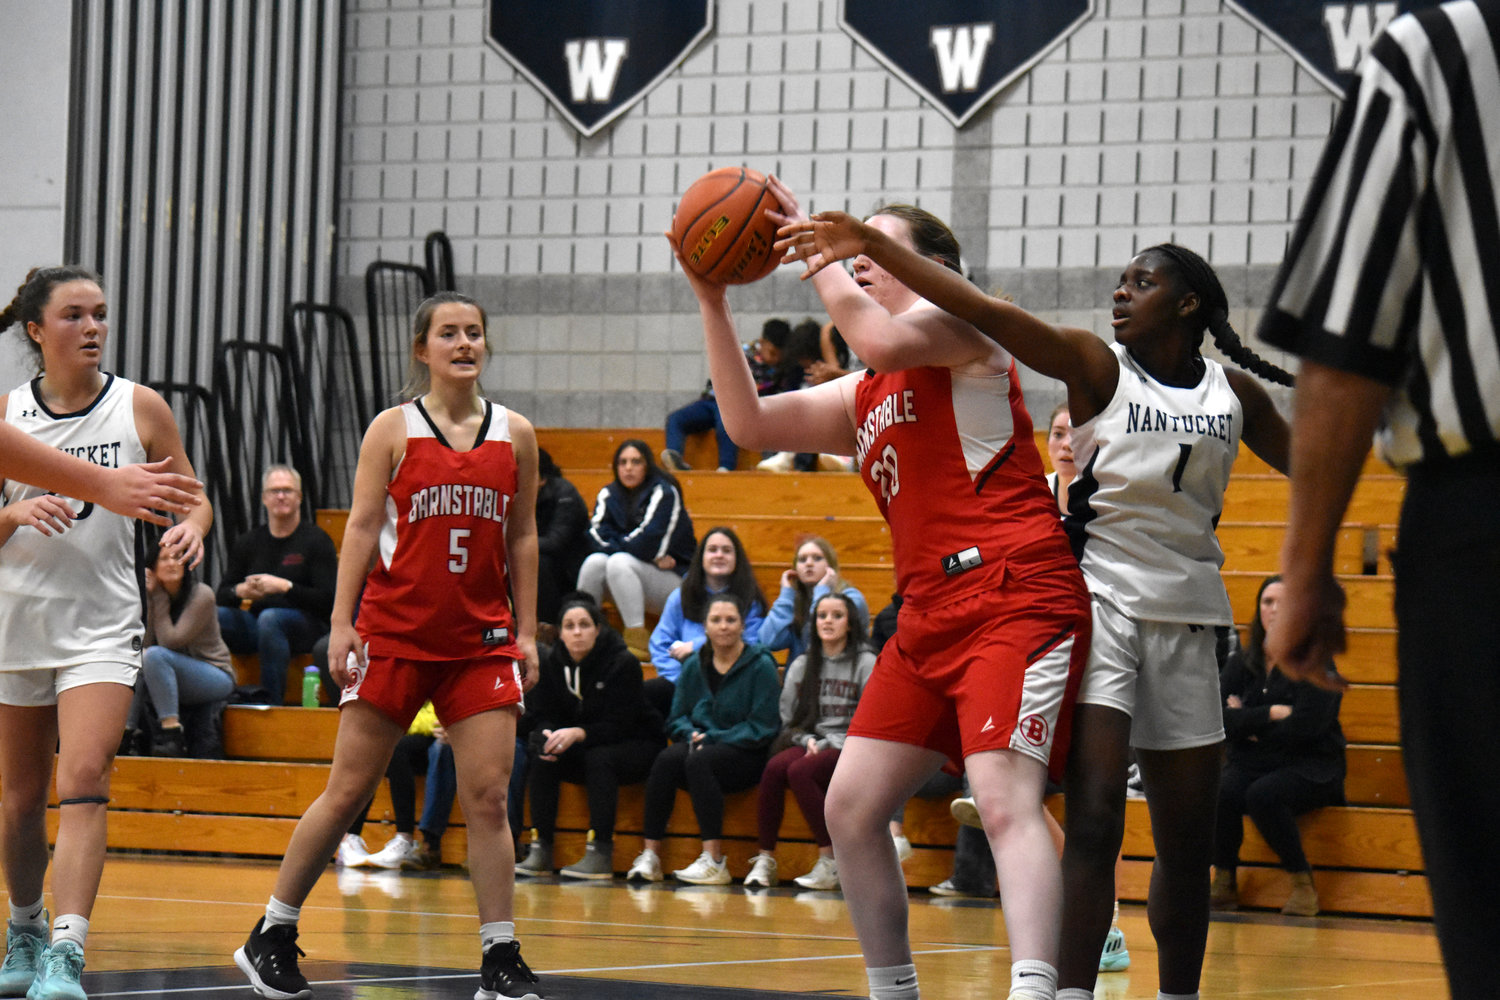 Kiesha Fowler, right, disrupts a shot during the Whalers’ game against Barnstable.